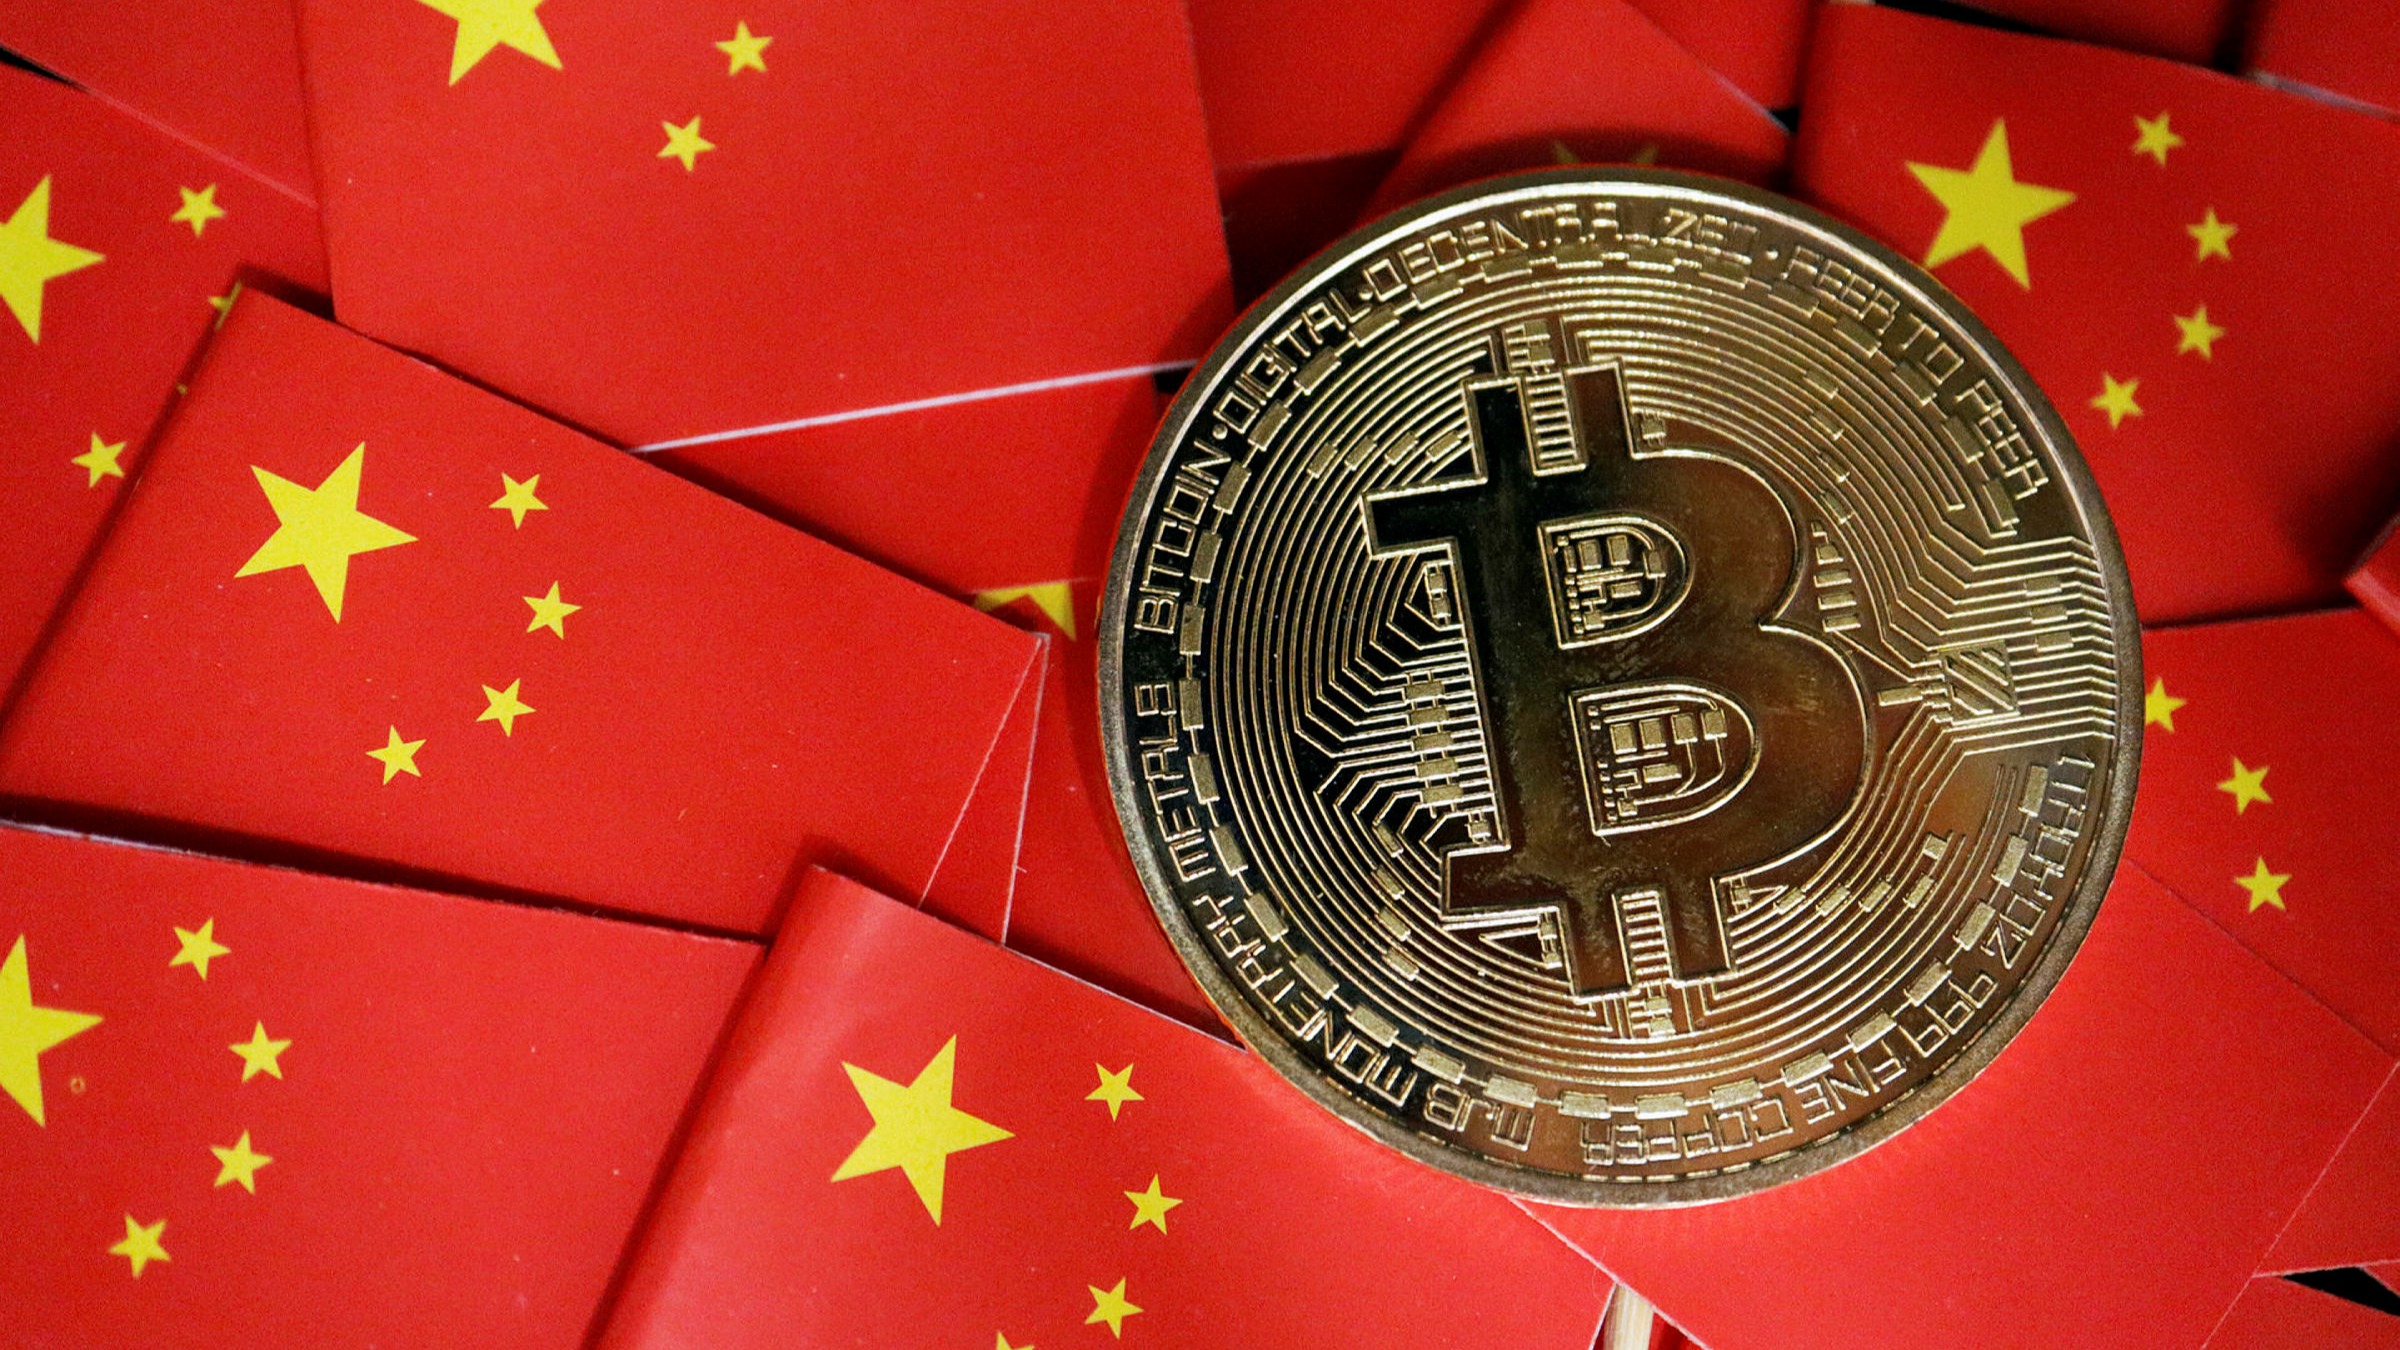 Chinese crypto users are still finding ways to get around the ban